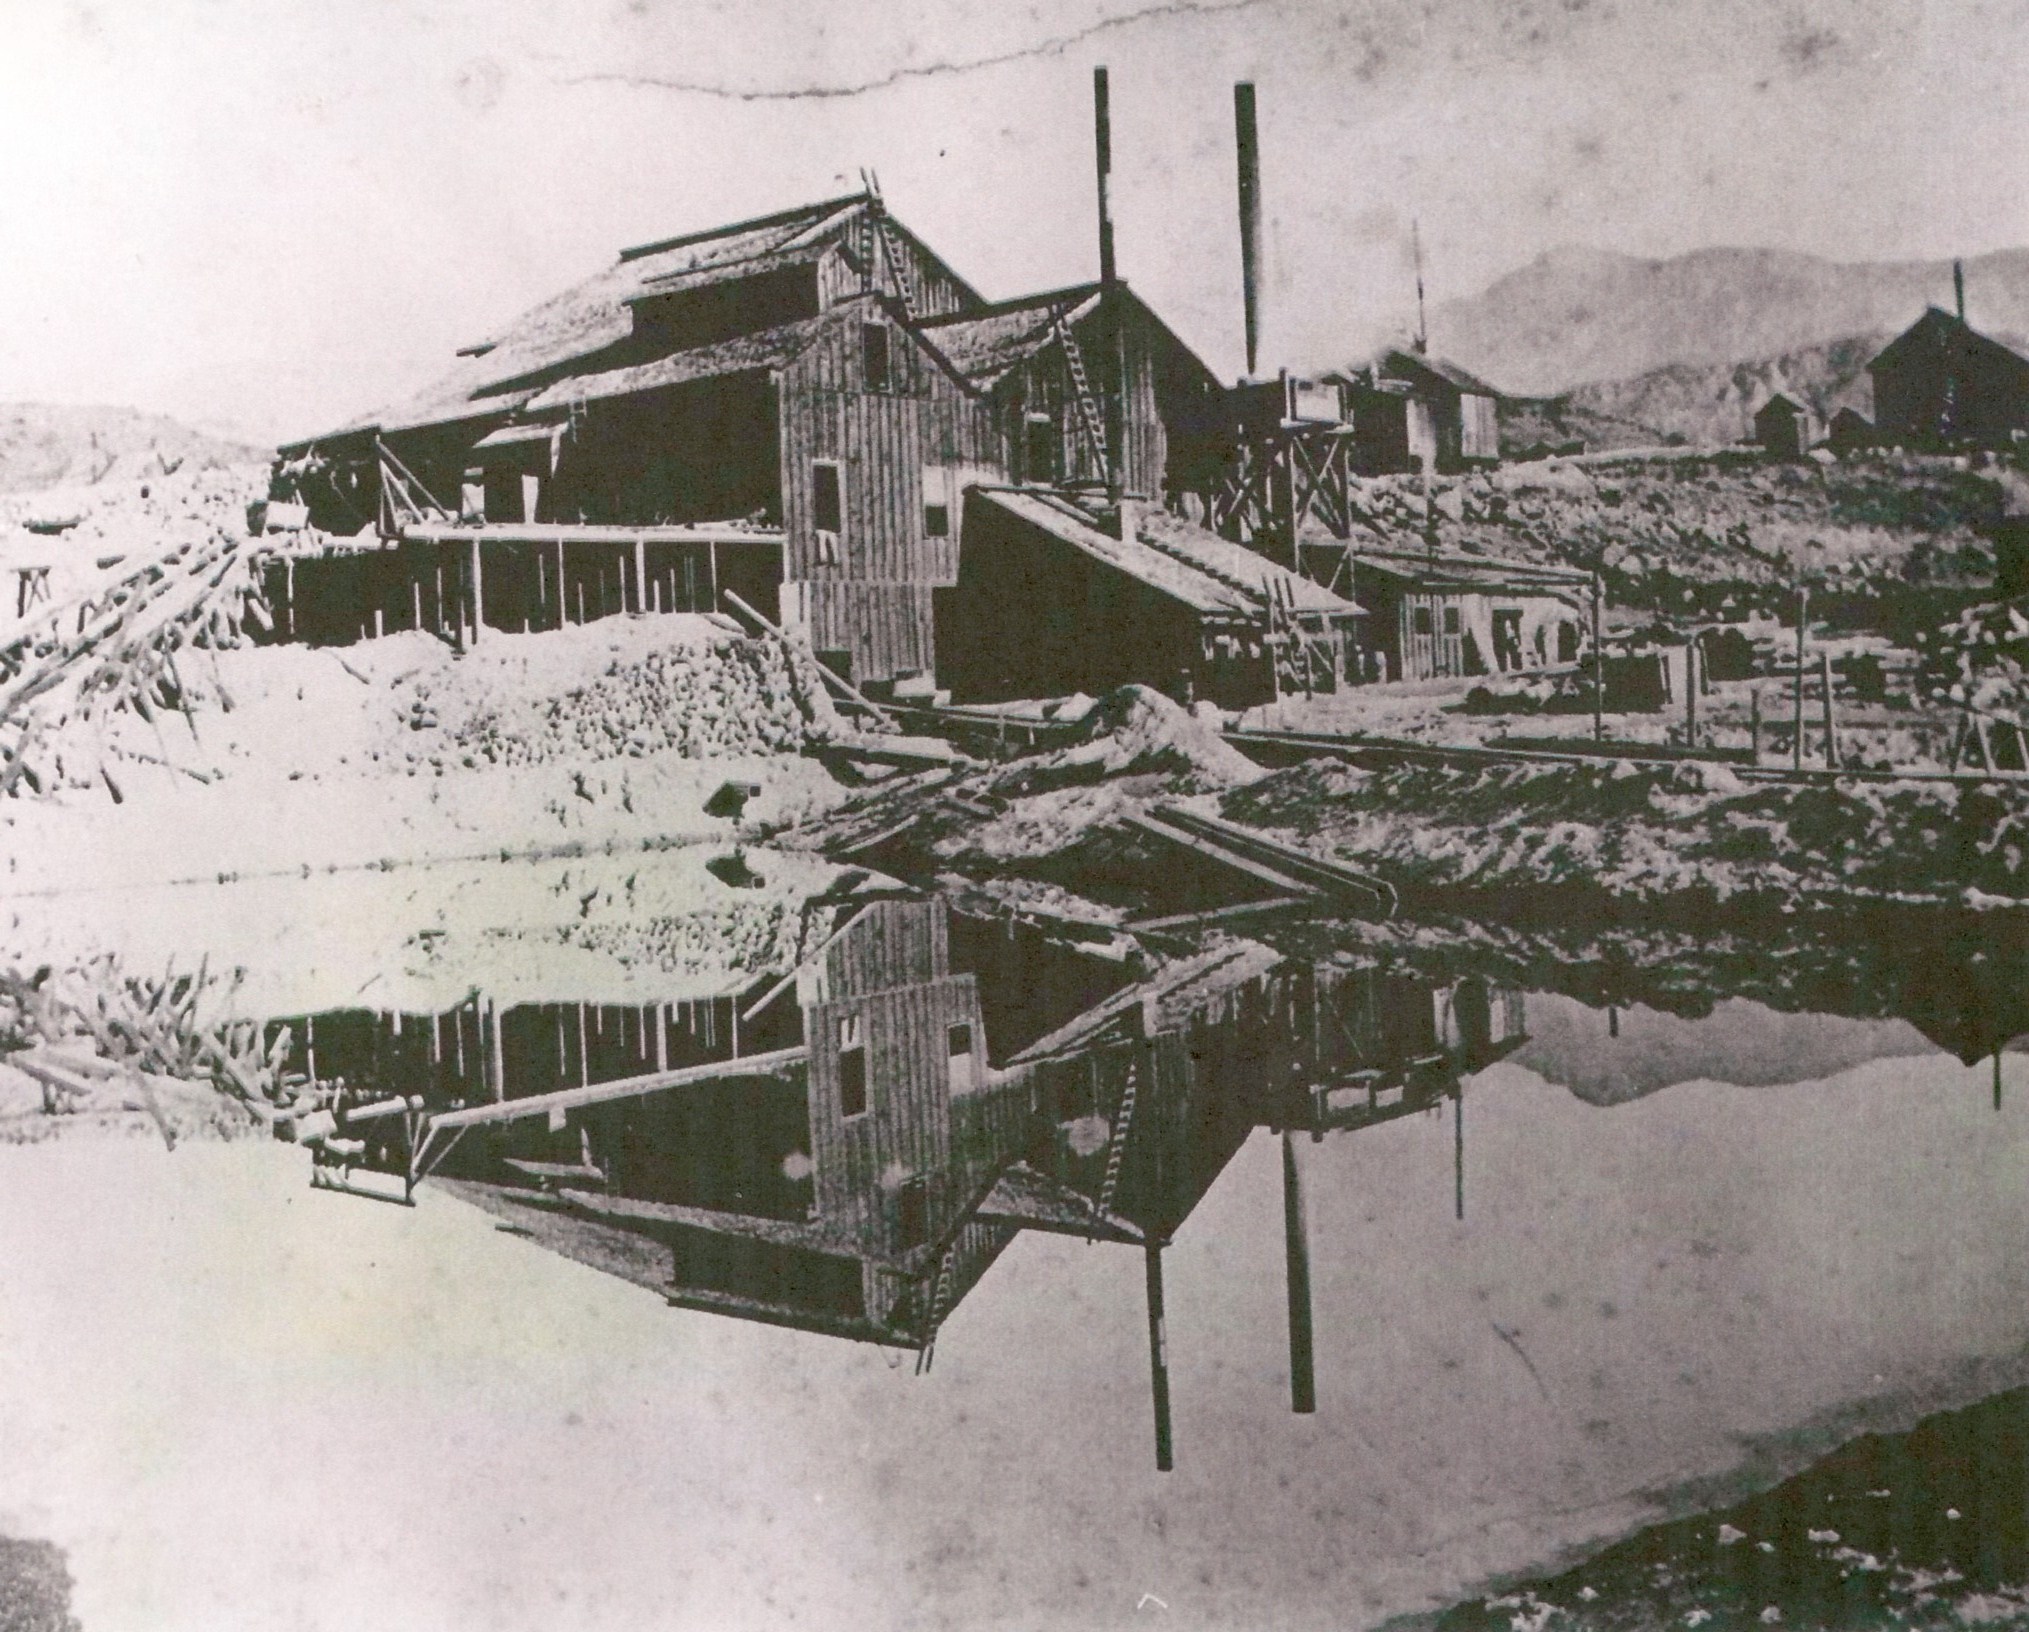 The Christy Mill in Silver Reef